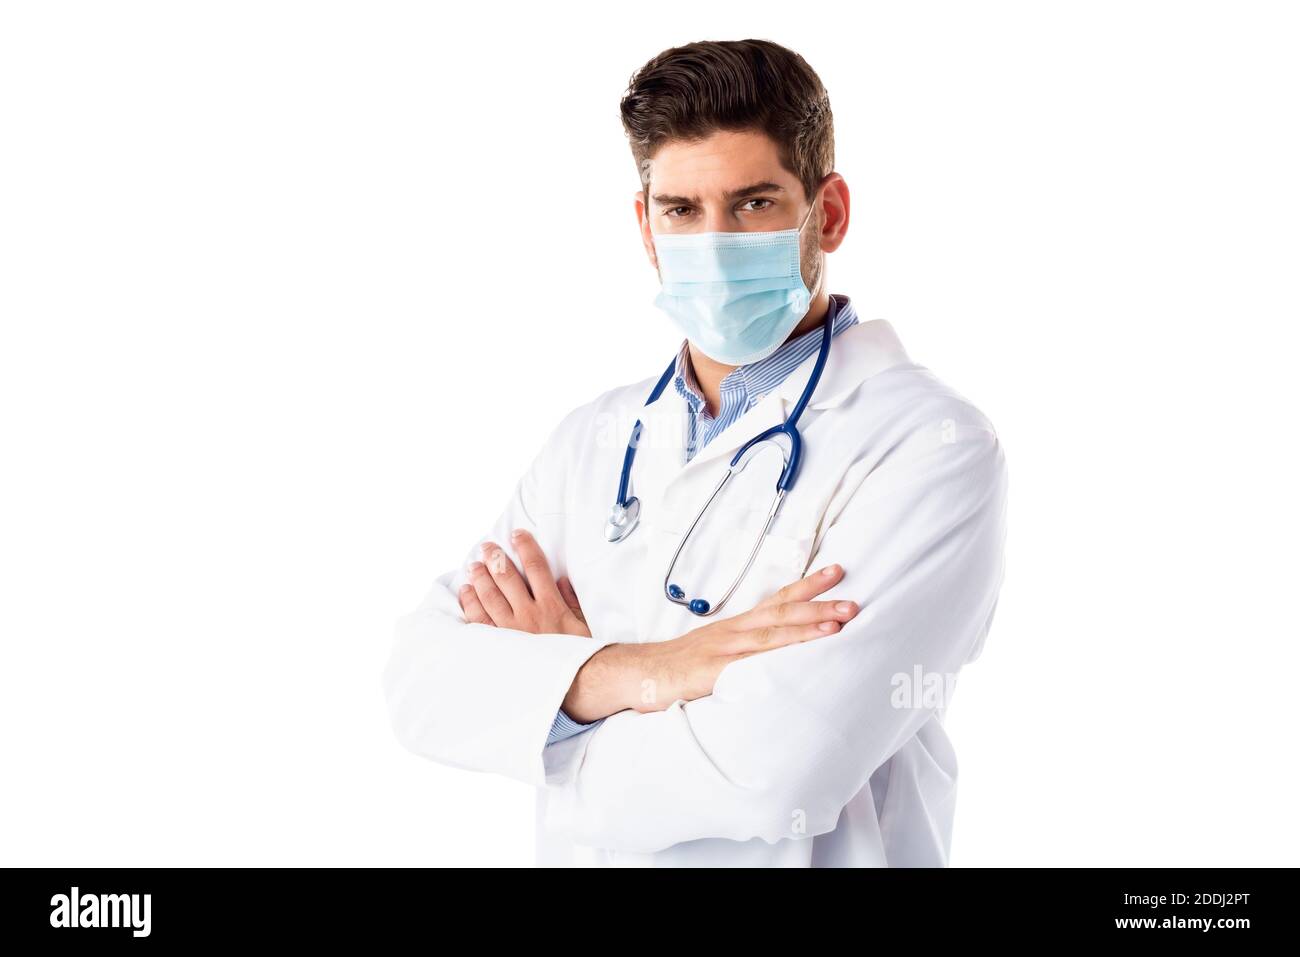 Portrait shot of male doctor wearing face mask while standing with arms crossed at isolated white background. Copy space. Stock Photo